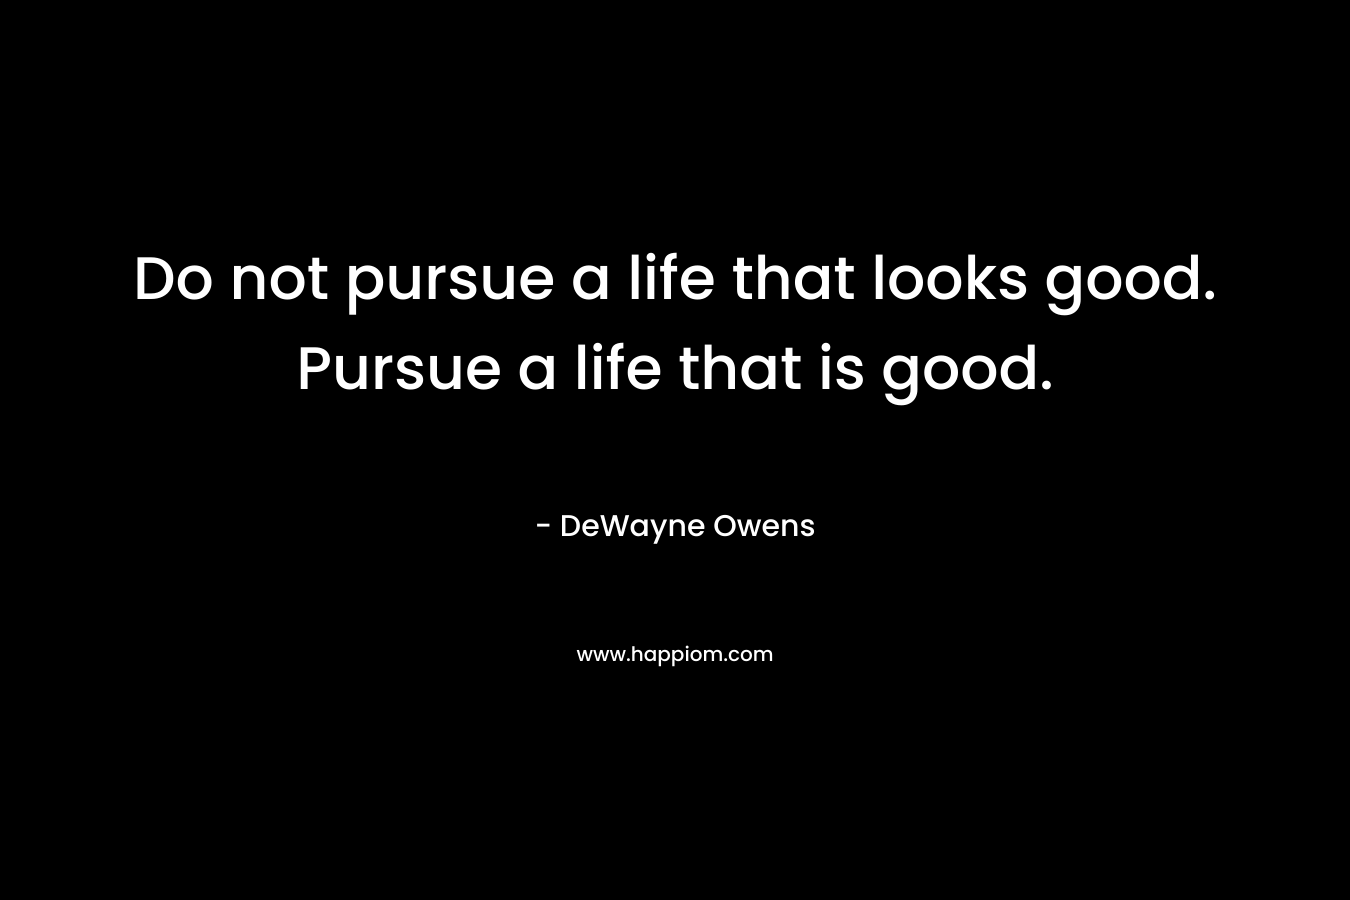 Do not pursue a life that looks good. Pursue a life that is good.